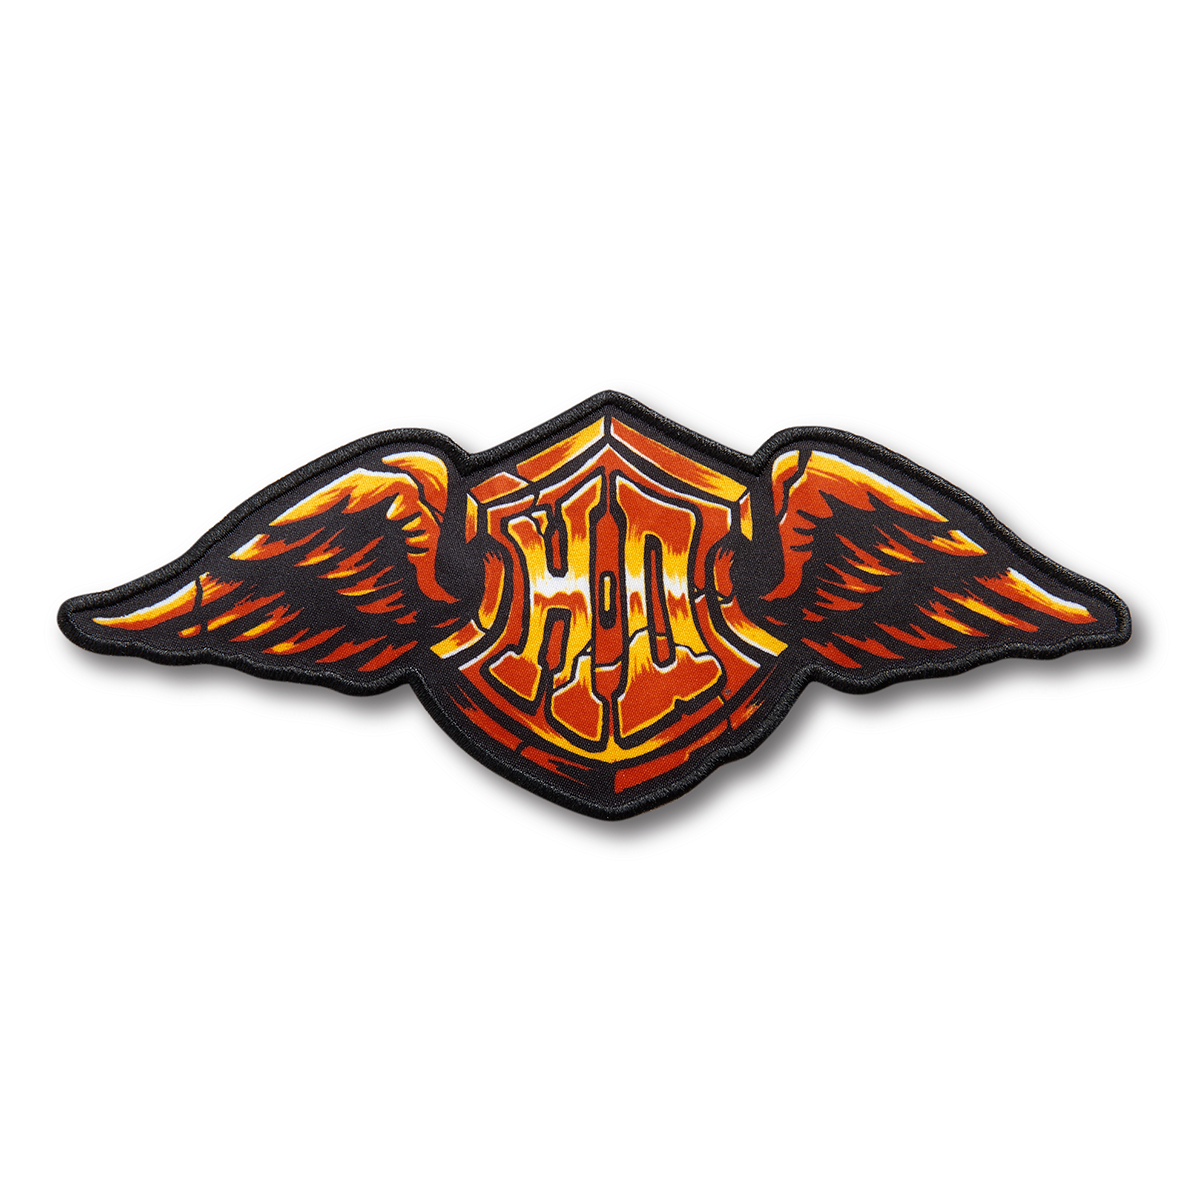 Harley-Davidson Stone Wings Iron-On Patch - 97659-21VX